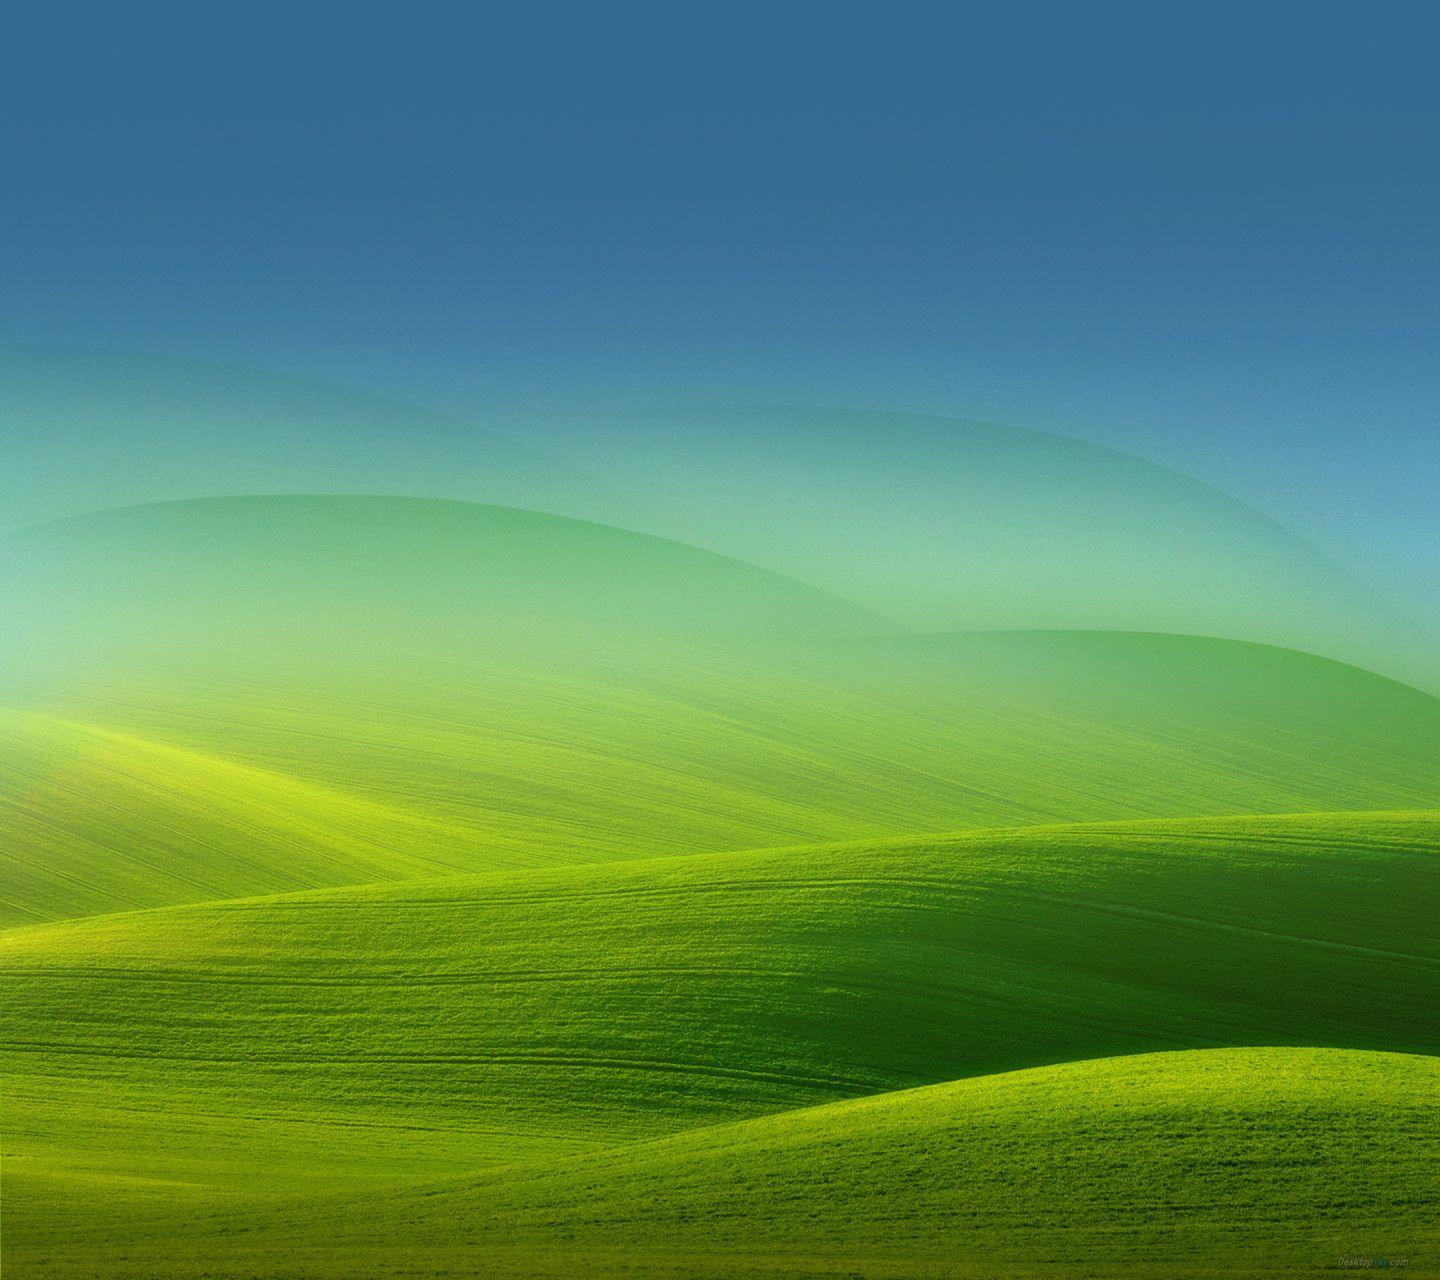 Xiaomi MIUI Wallpaper Collection Android ROM